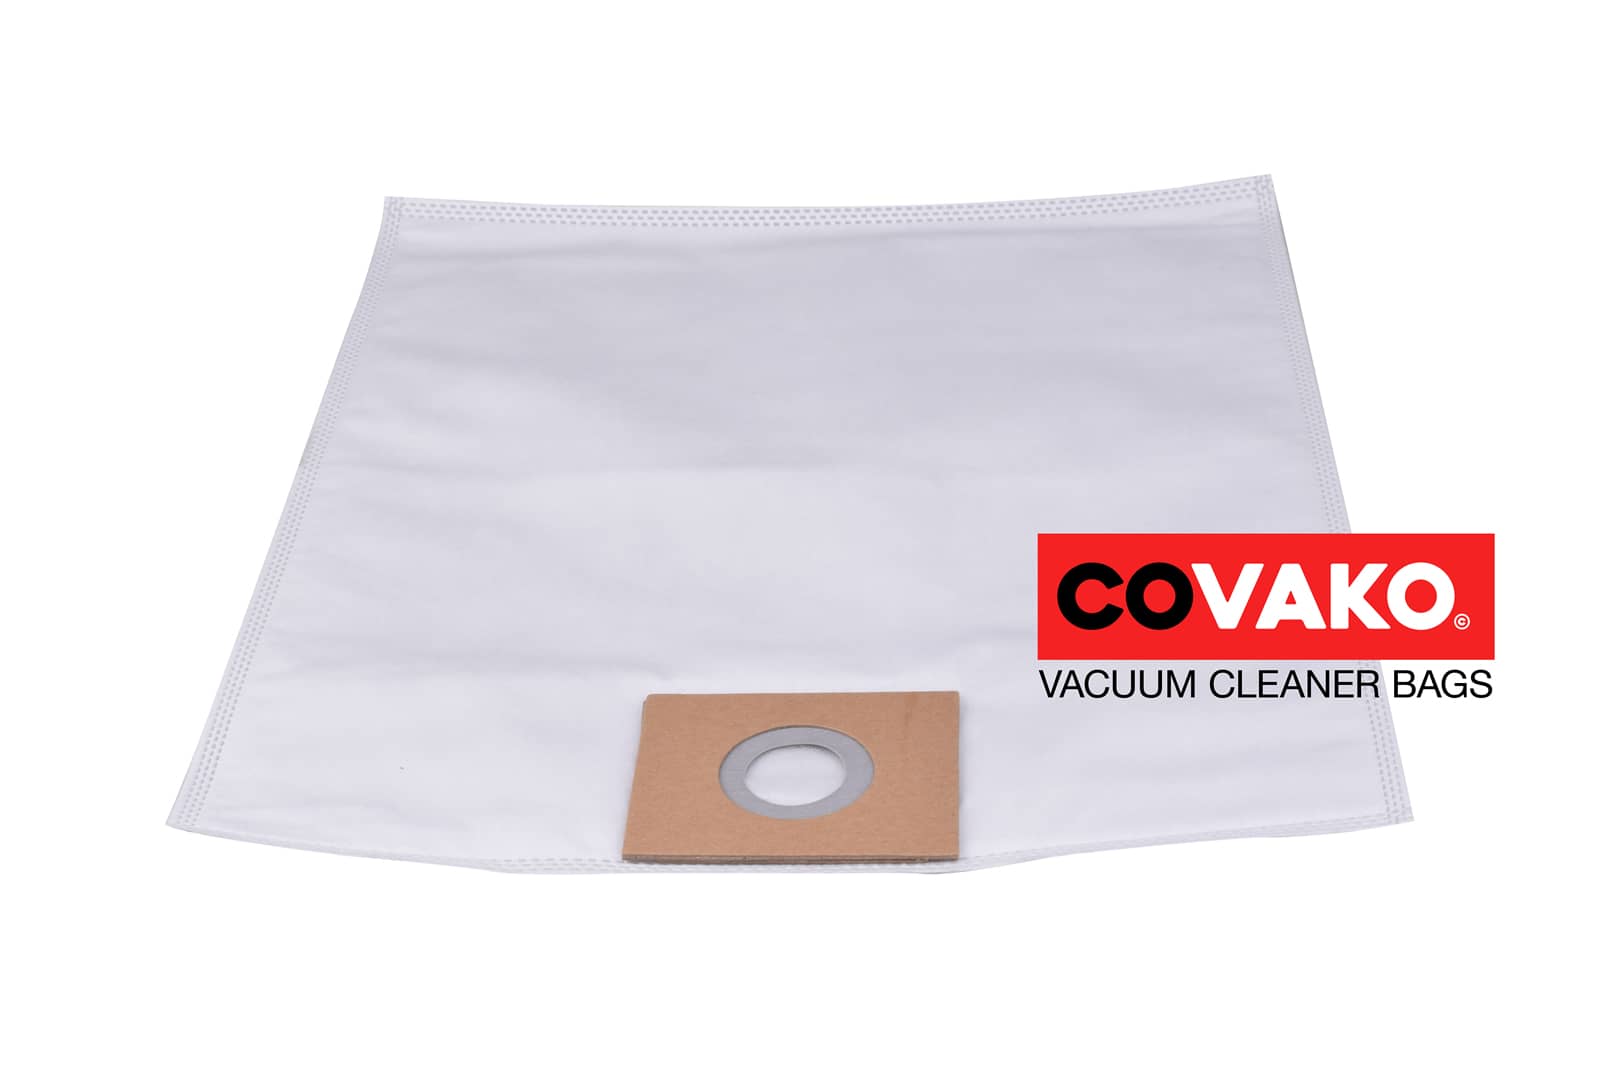 I-vac Dryver 10RE / Synthesis - I-vac vacuum cleaner bags